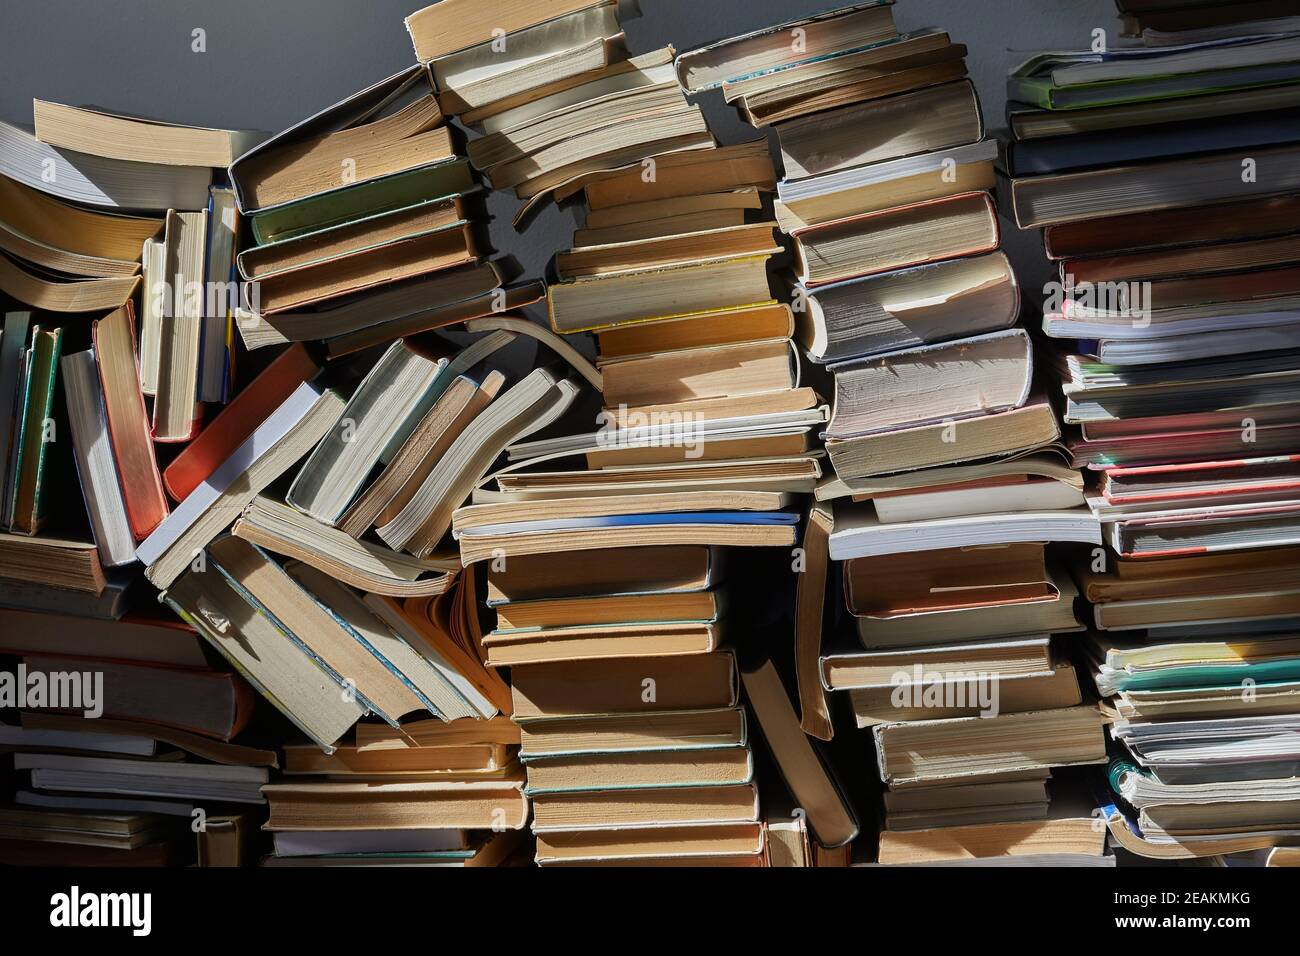 Wall of books piled up Stock Photo